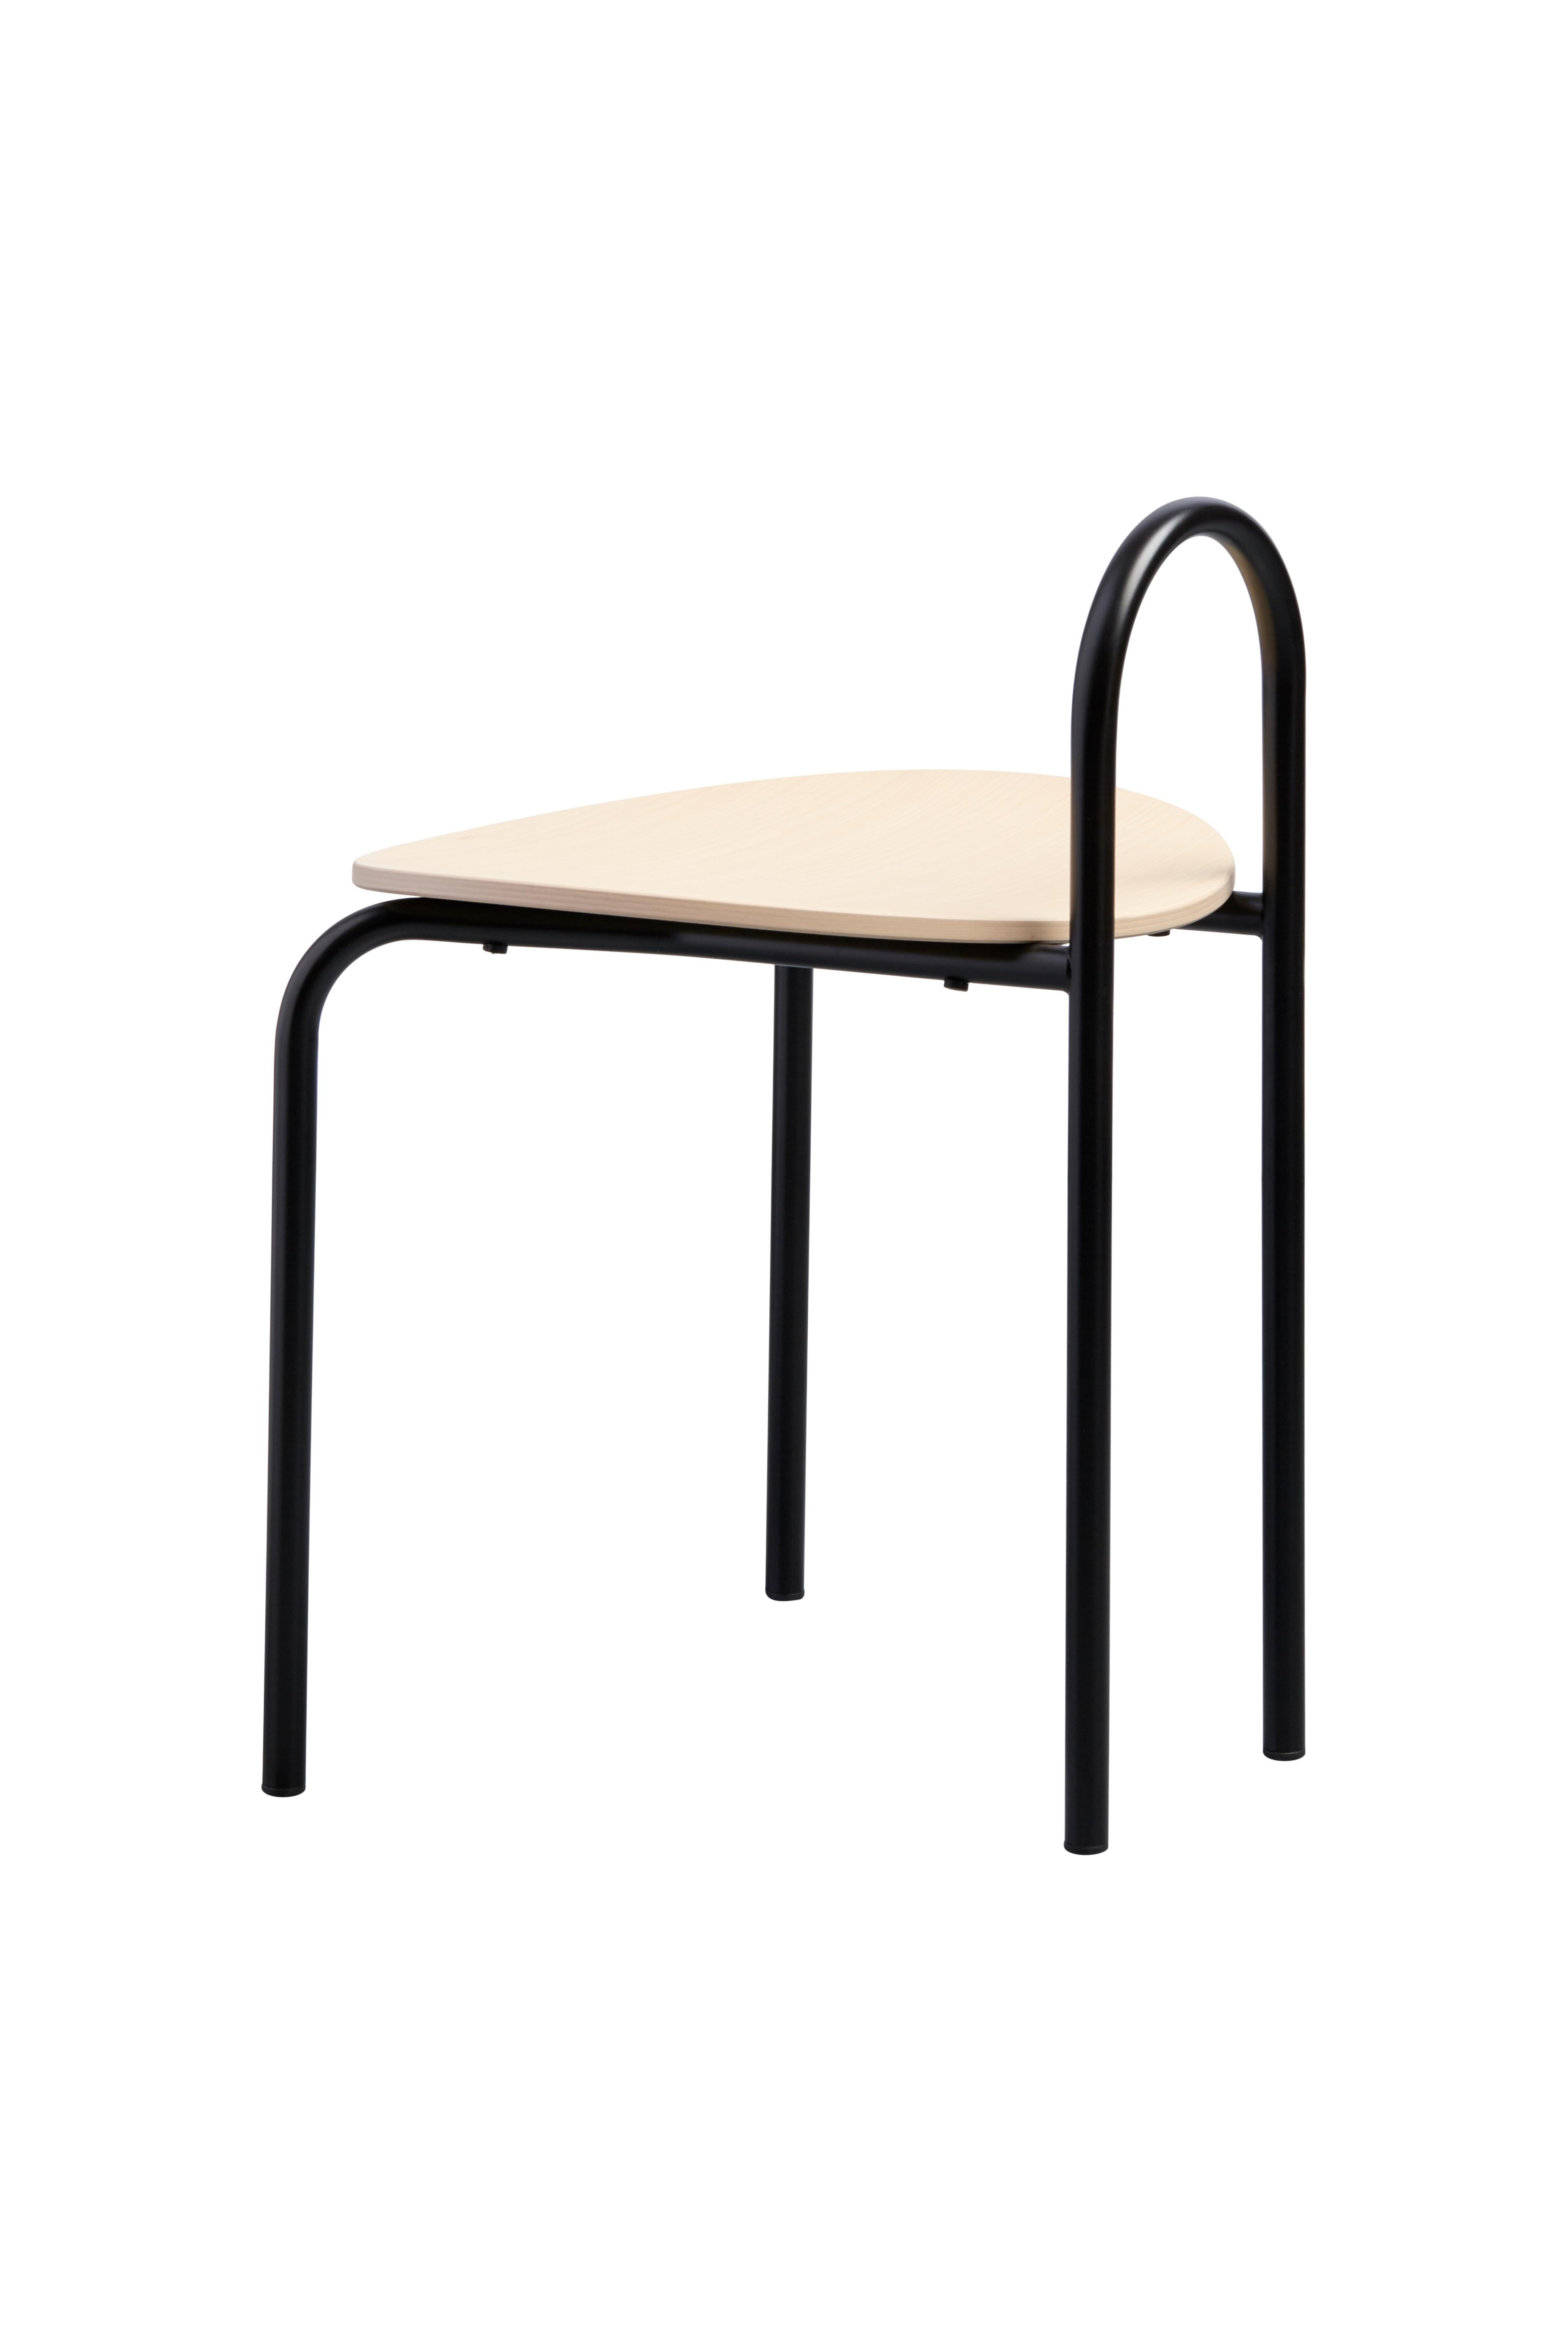 Minimalist SP01 Michelle Stool in Satin Black, Made in Italy For Sale